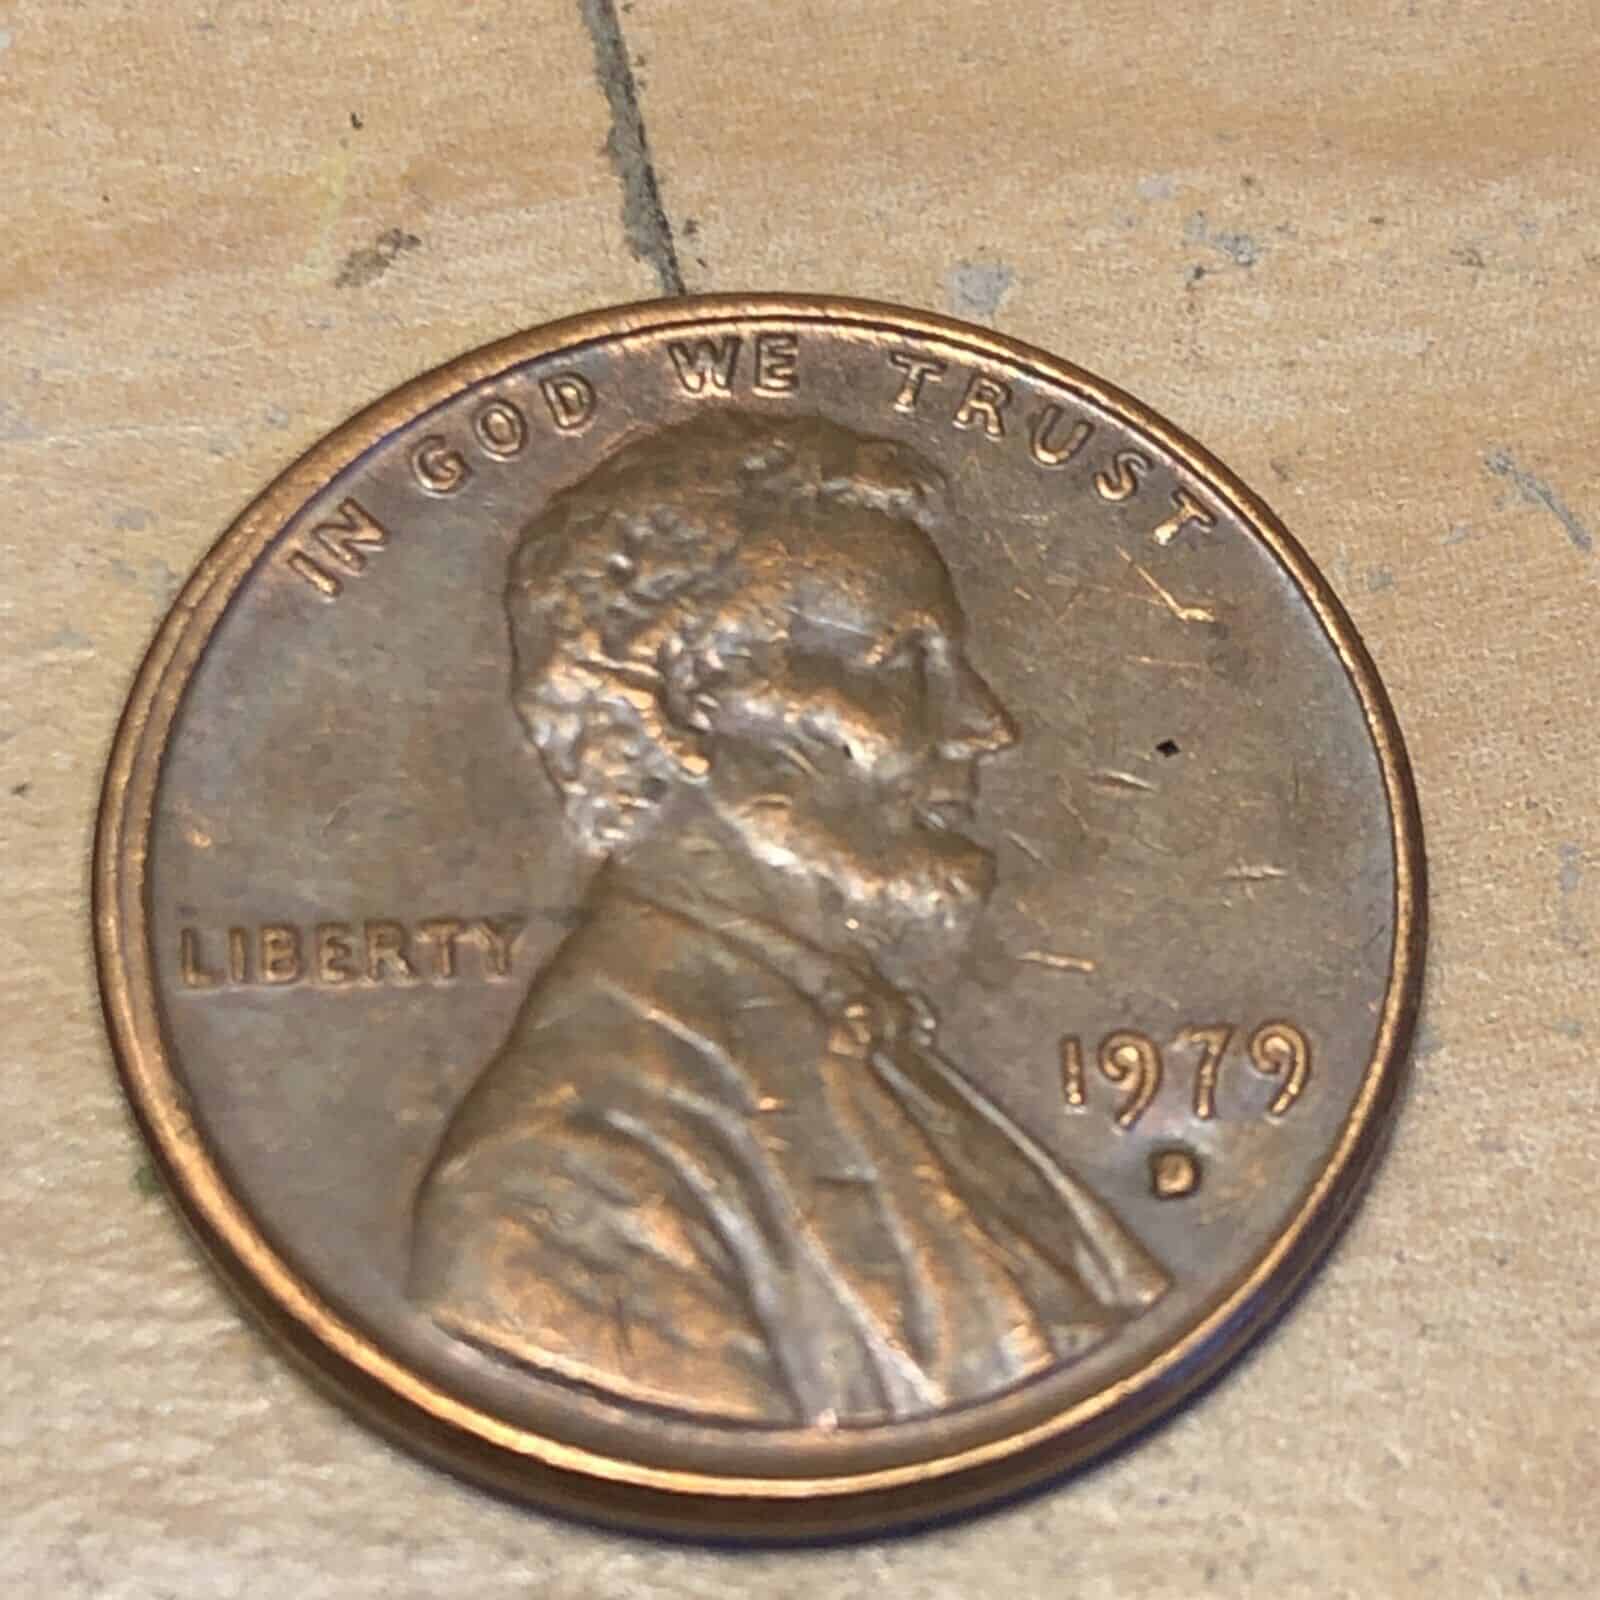 1979 Lincoln Penny Repunched Mint Mark Error